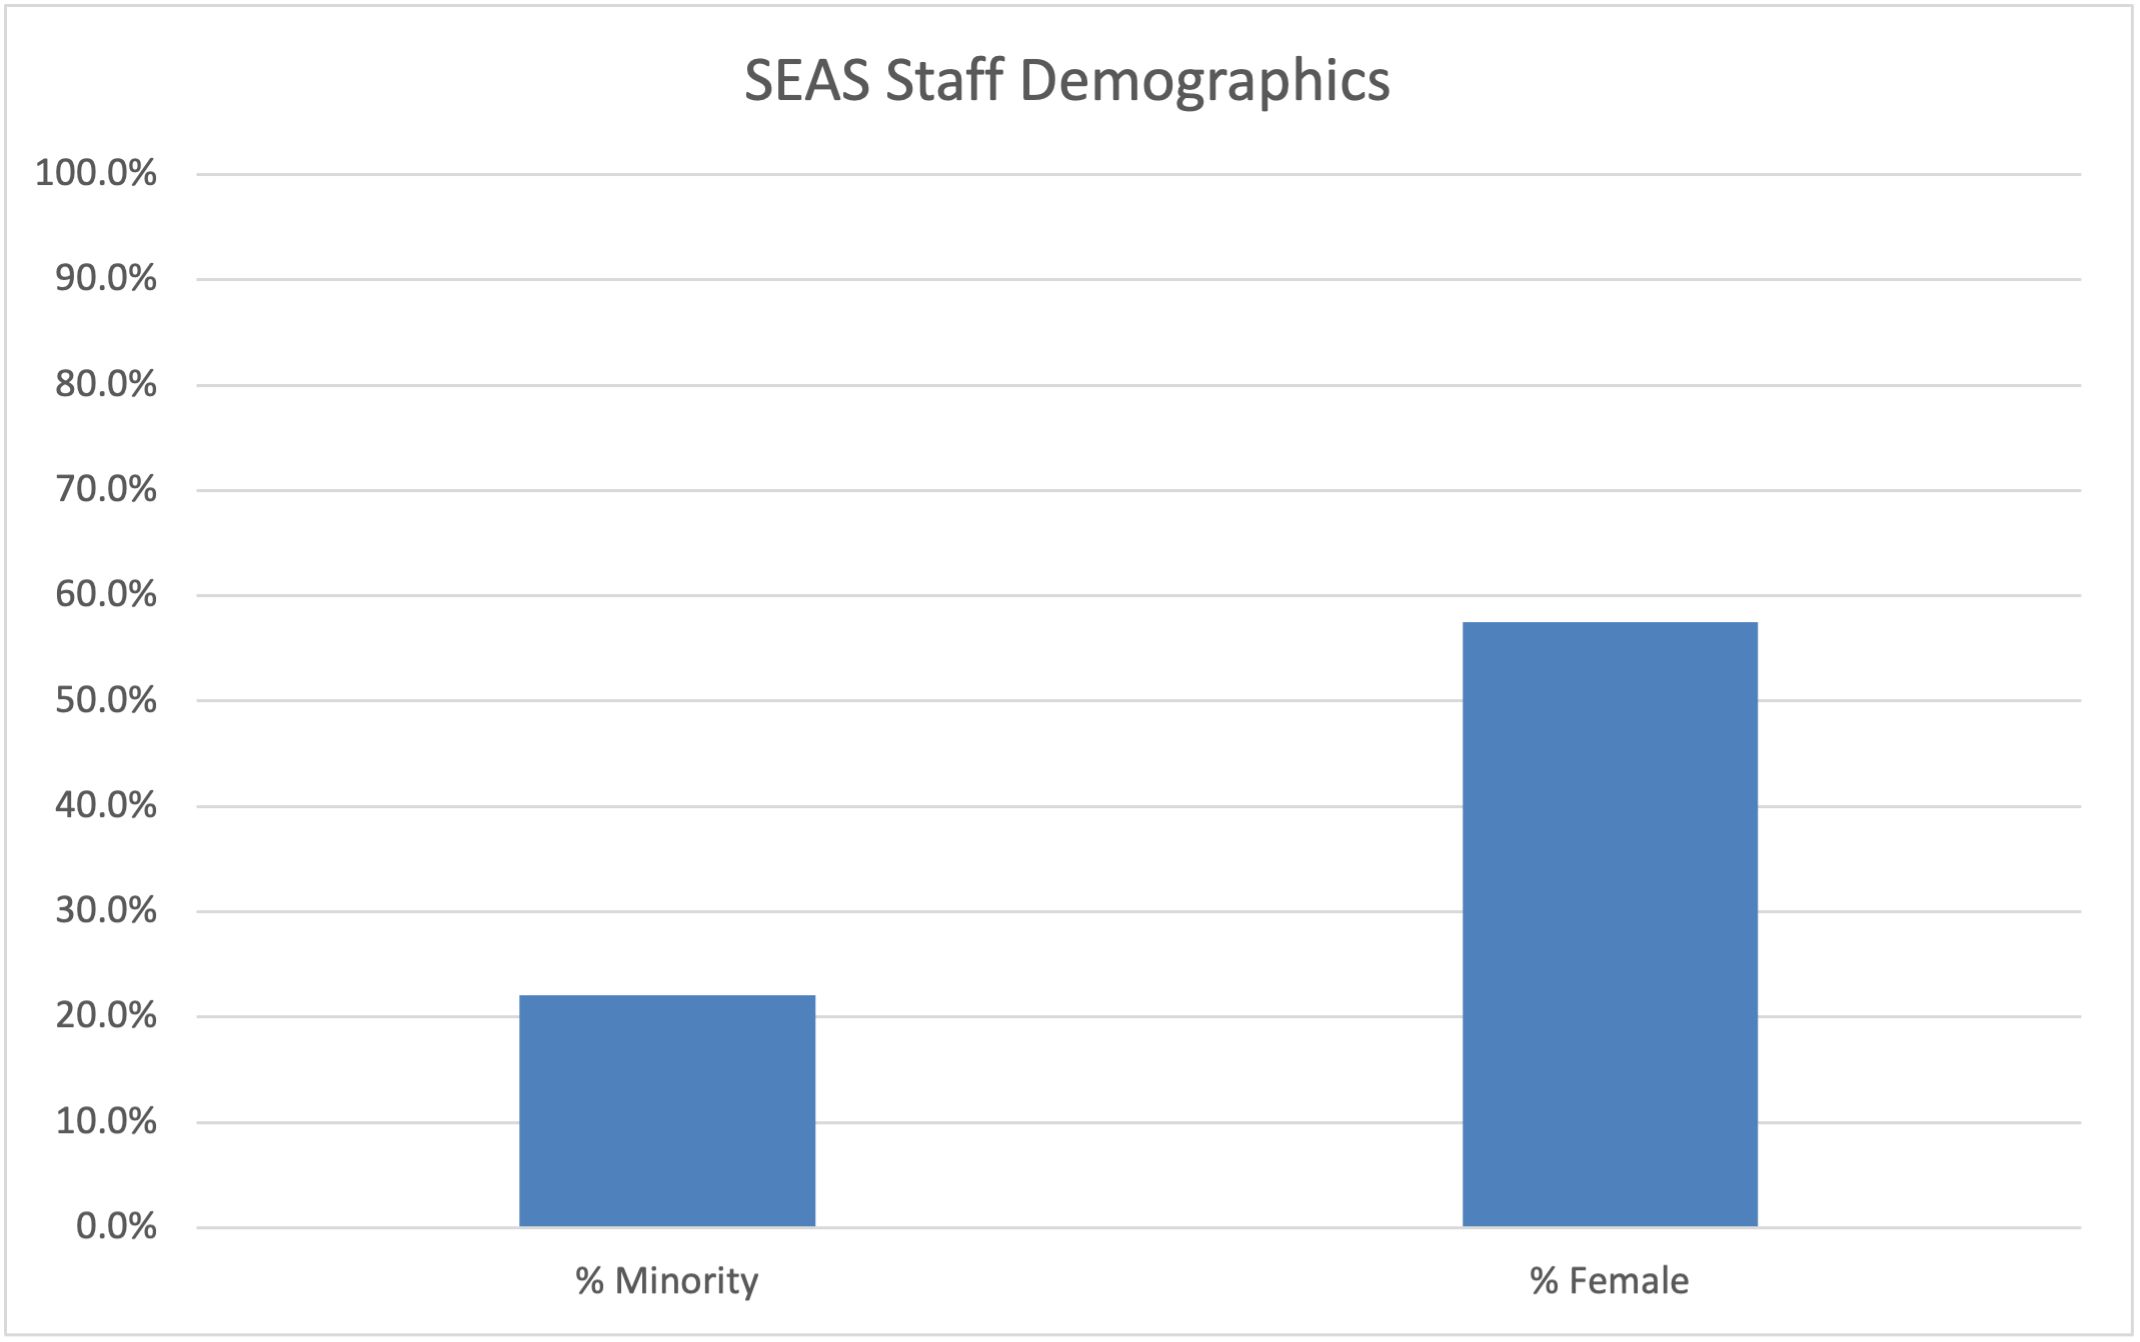 Bar chart displaying SEAS Staff Demographics. About 20% of identify as a minority, and about 58% identify as female.